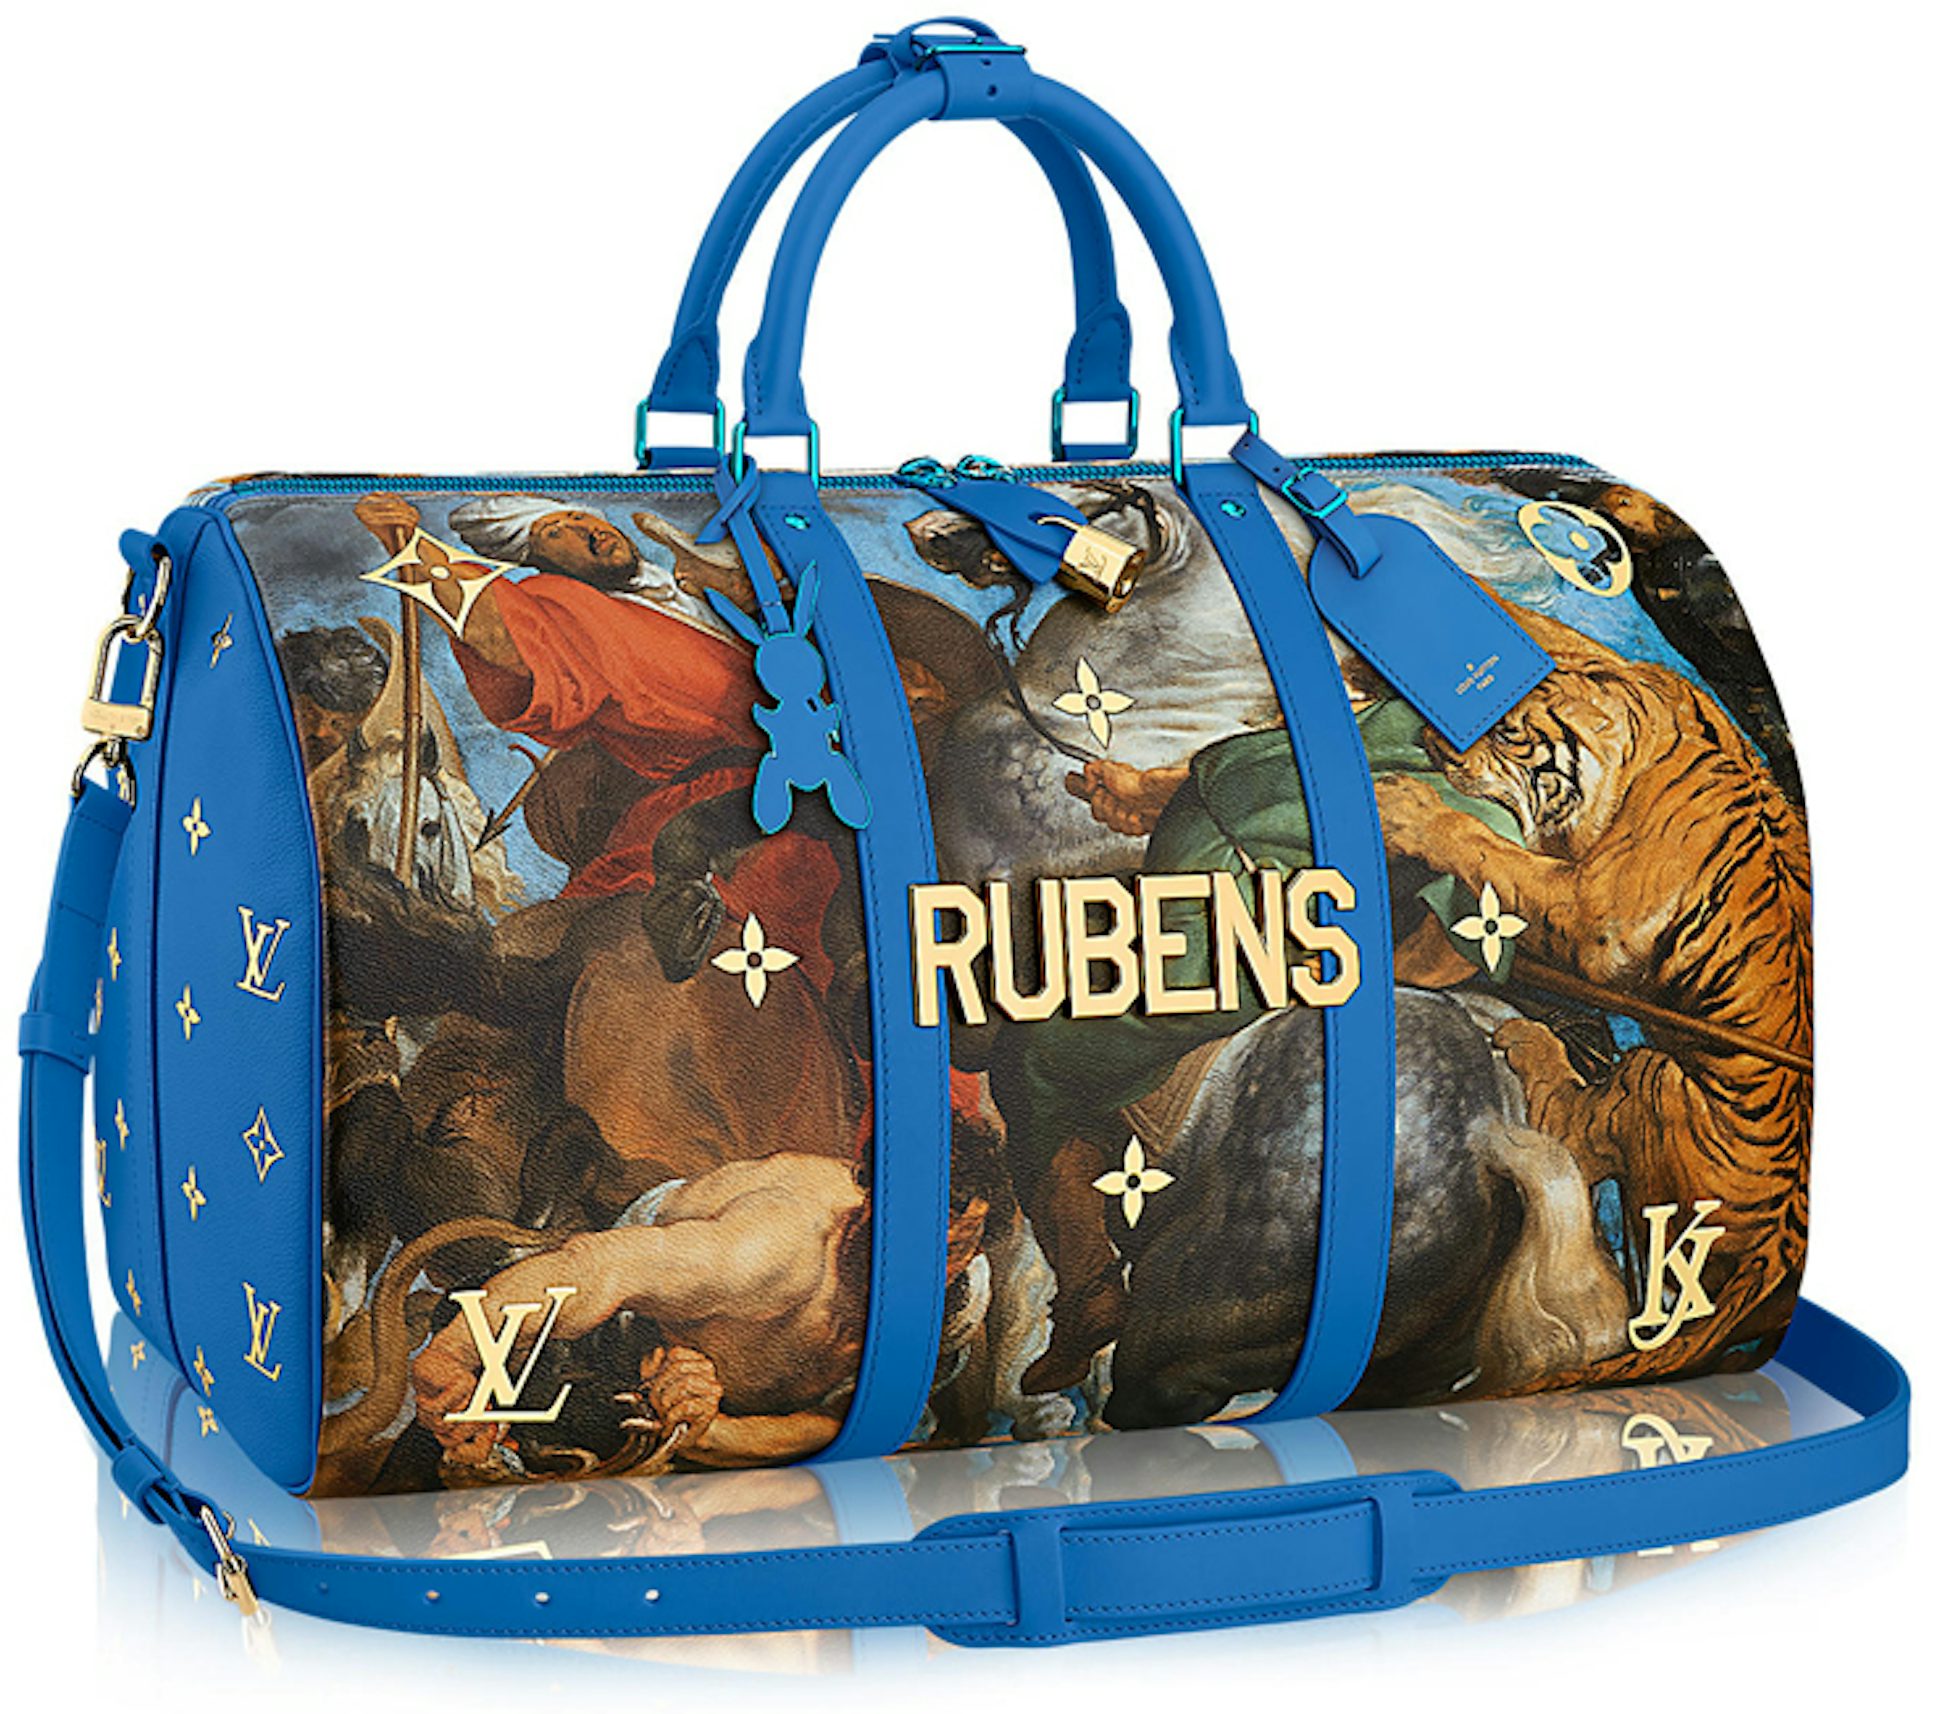 Louis Vuitton Limited Edition Coated Canvas Jeff Koons Van Gogh